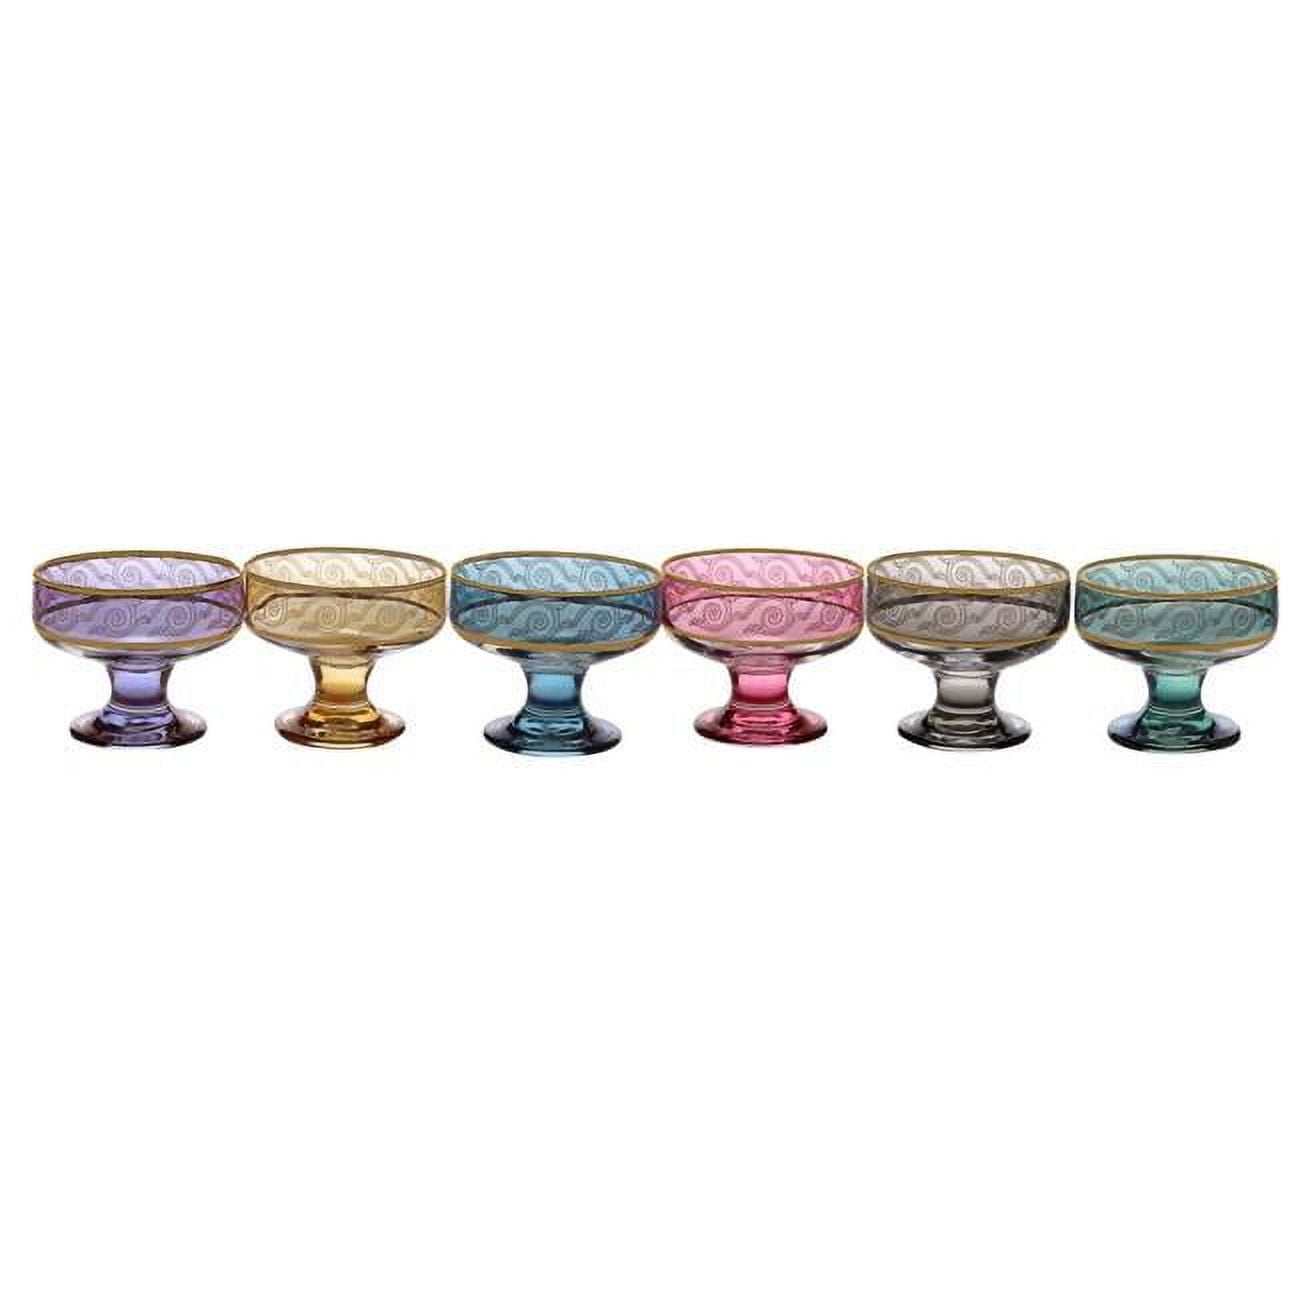 Classic Touch Cdgm645 4 X 3.25 In. Assorted Colored Dessert Bowls With Gold Design, Set Of 6